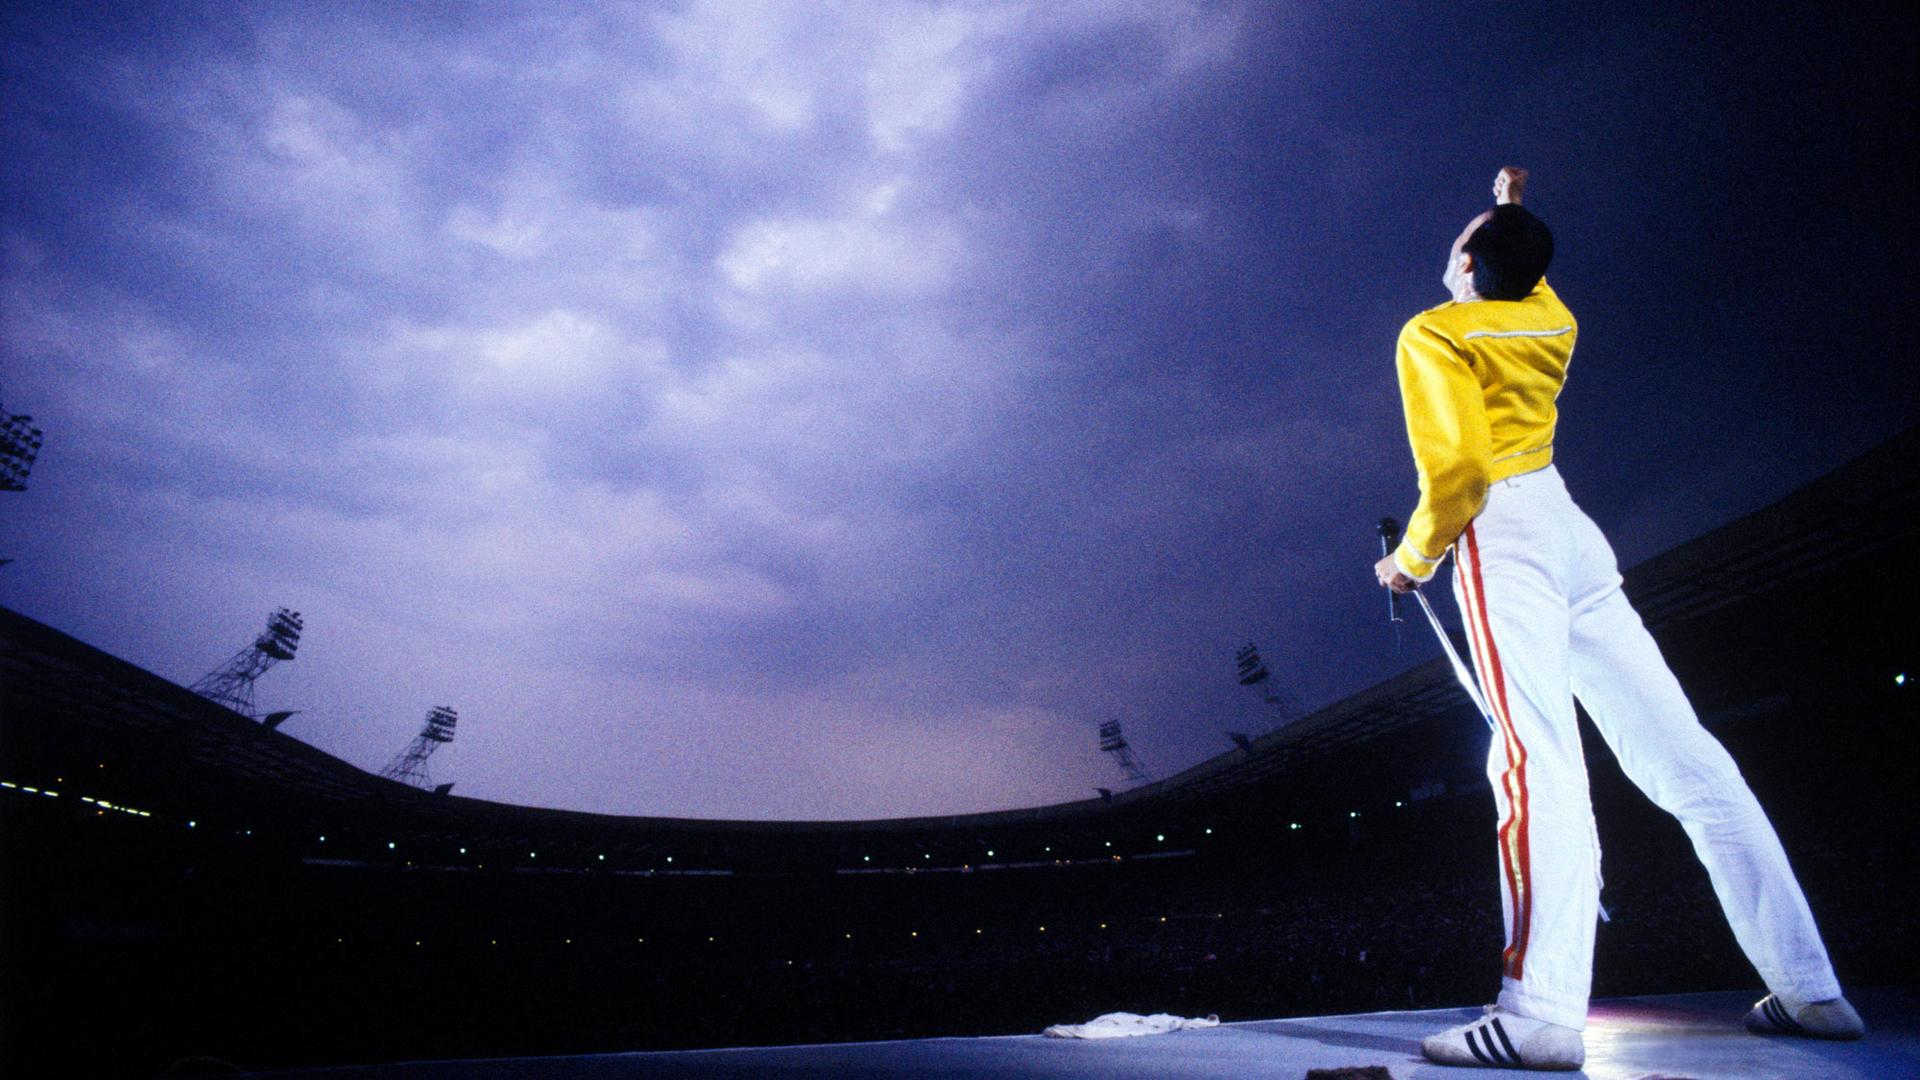 Freddie Mercury on stage wearing a yellow leather jacket and singing to the sky.